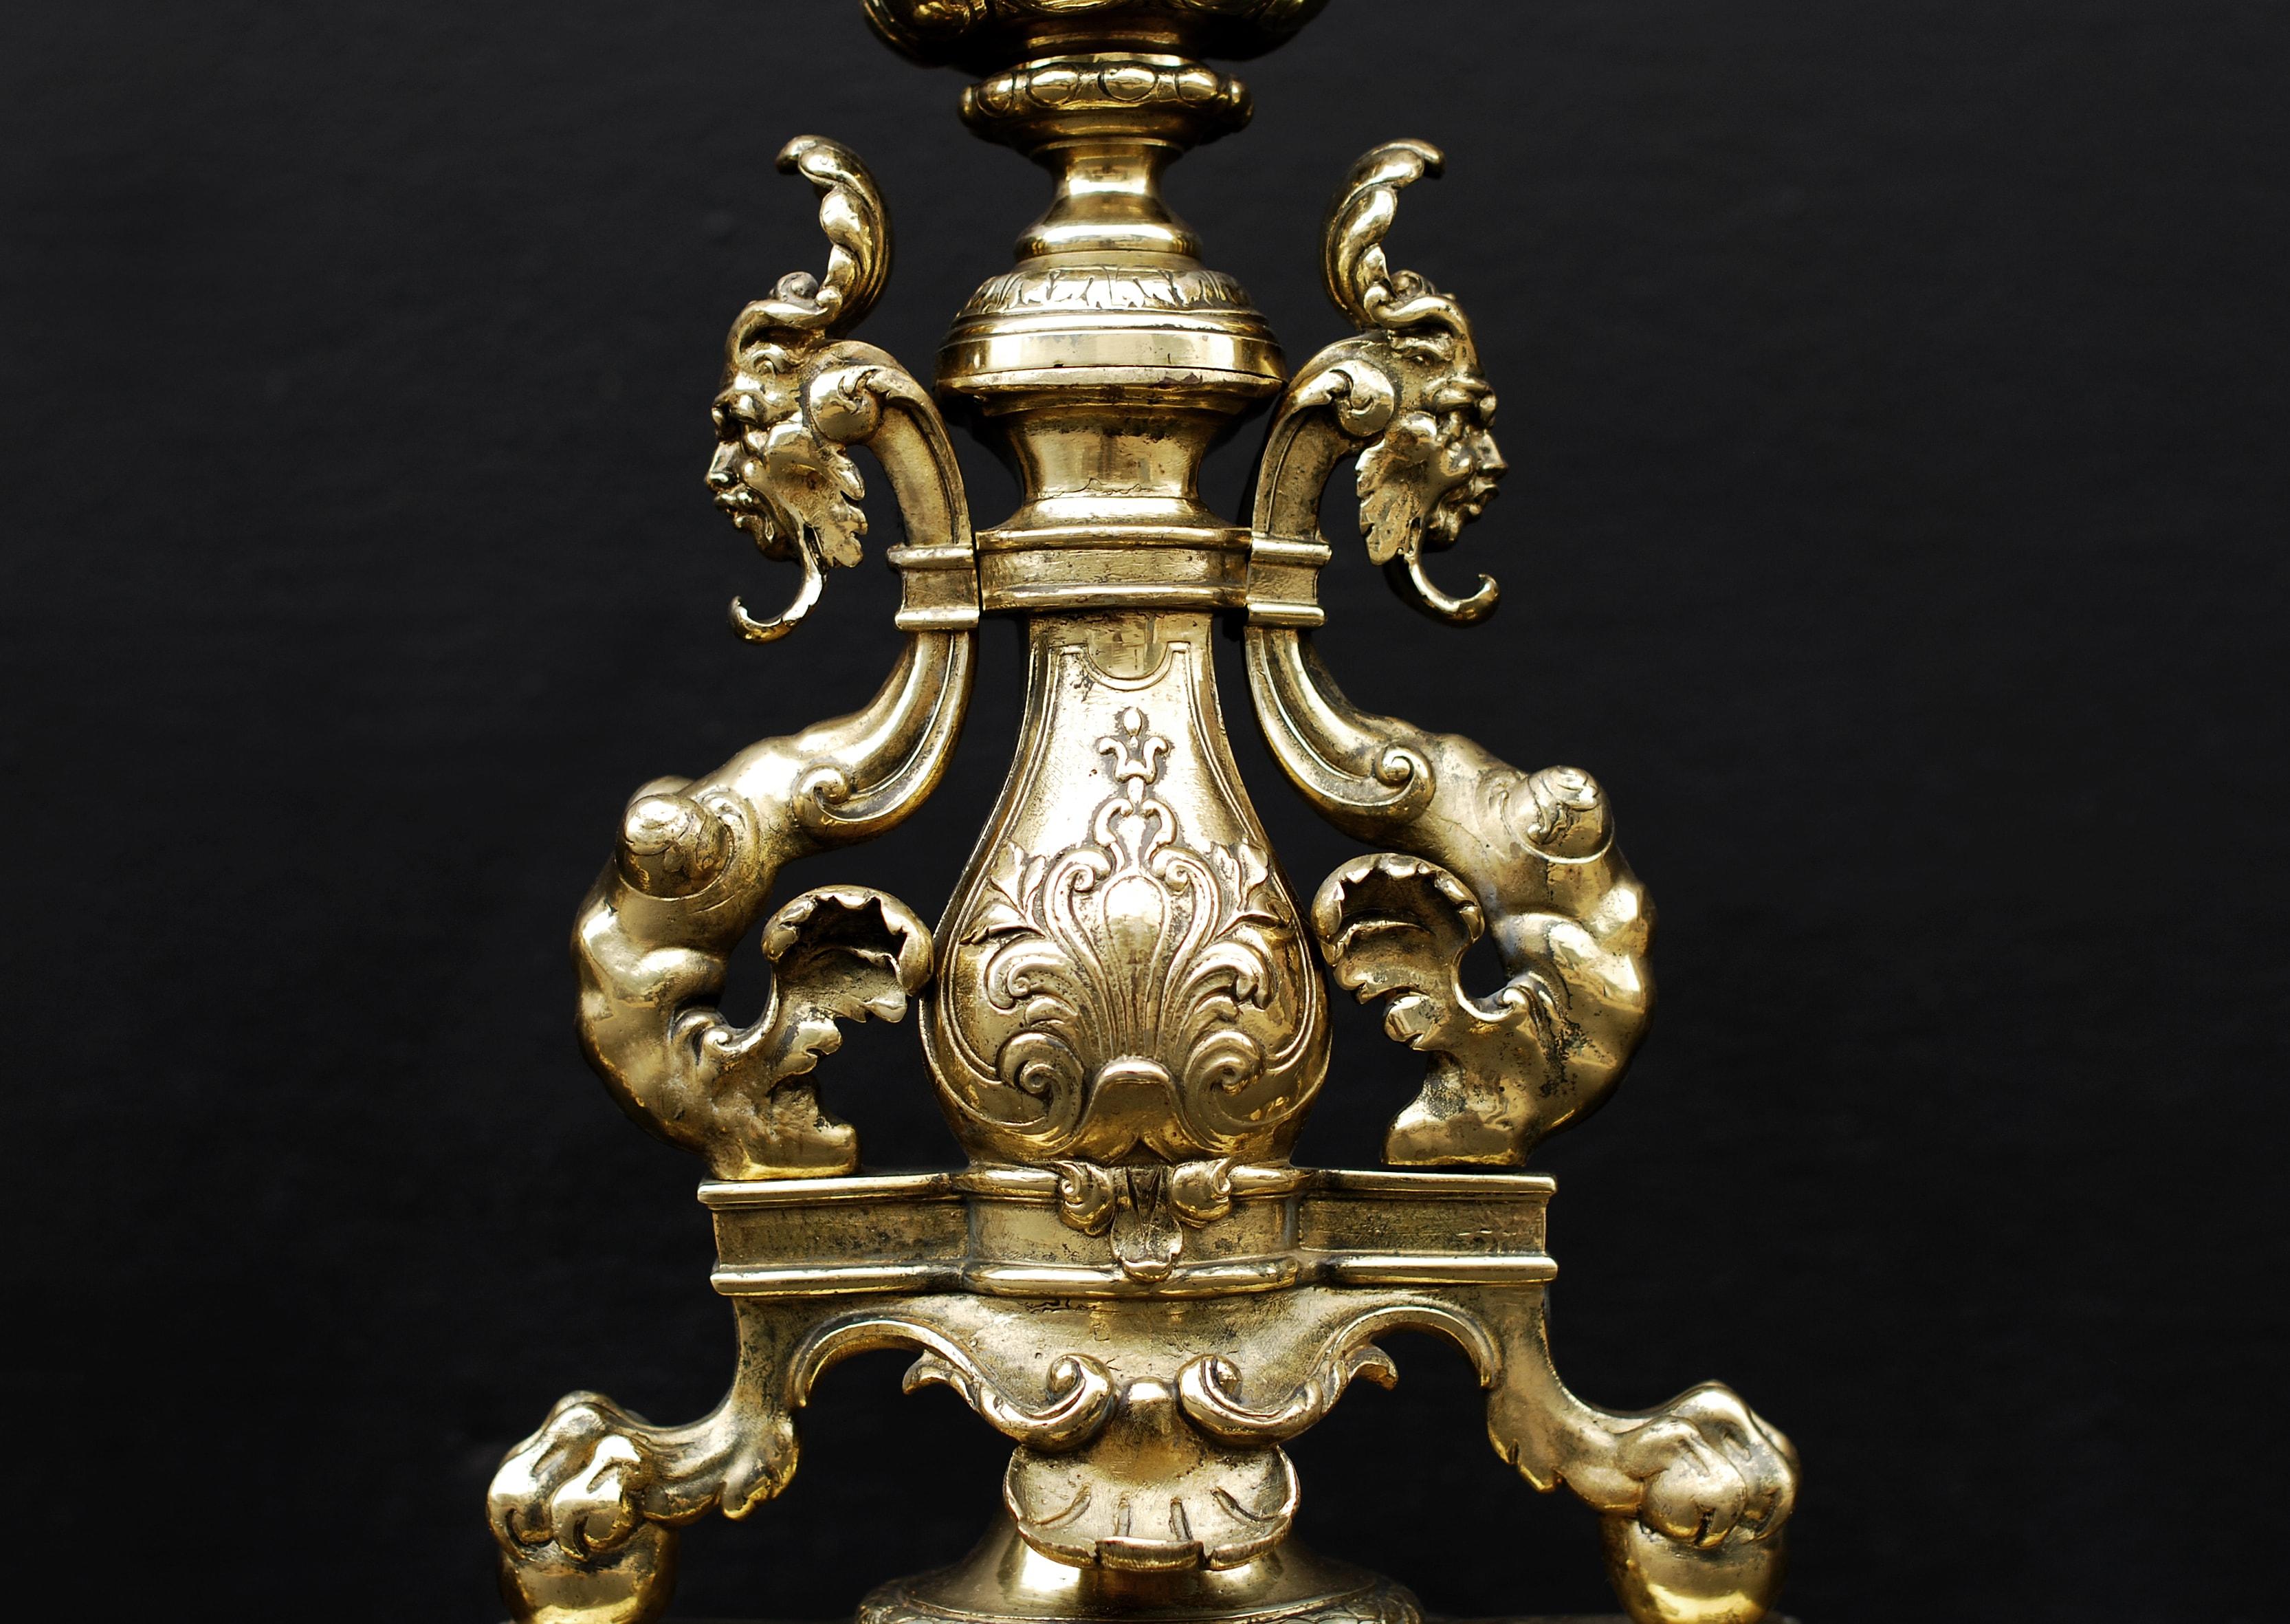 A pair of ornate English, 19th century brass firedogs. The plinths with rope and knoll moulding surmounted by drapery festoon and claw and ball feet with masks and ornately cast finial of acorn and fruit. (Back bars could be added if